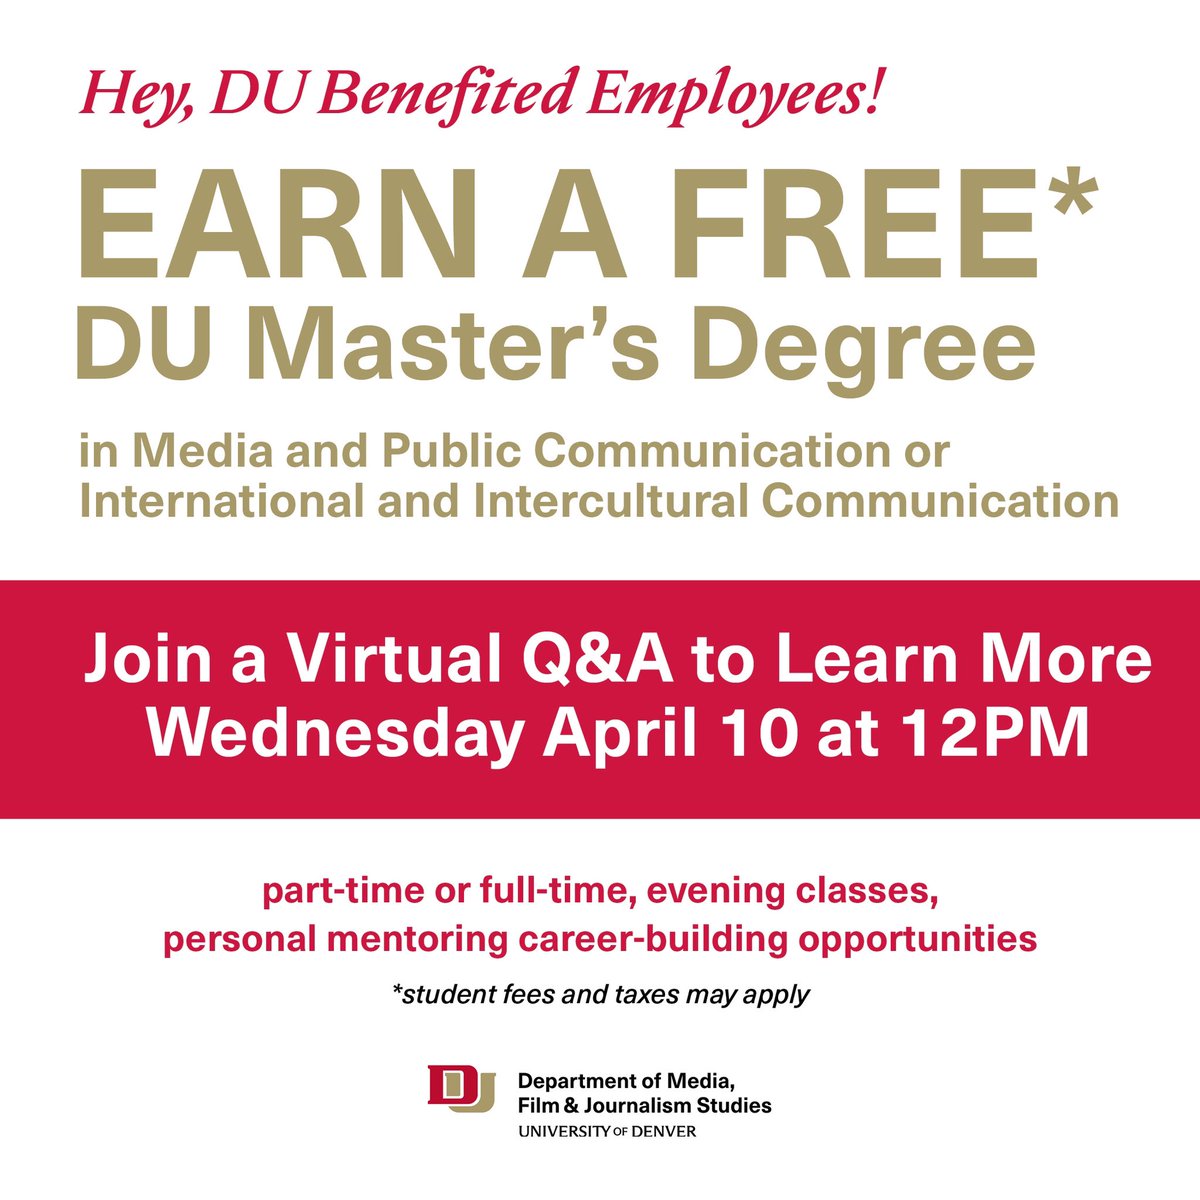 📢 calling all @UofDenver benefited employees!! Join #MFJS on 4/10 at 12pm for a virtual Q&A session to learn about how to get a ✨free✨ master’s degree in our #MEPC and #IIC programs. Meet the directors @nadiakaneva and @kareemeld. Register here: udenver.zoom.us/meeting/regist…